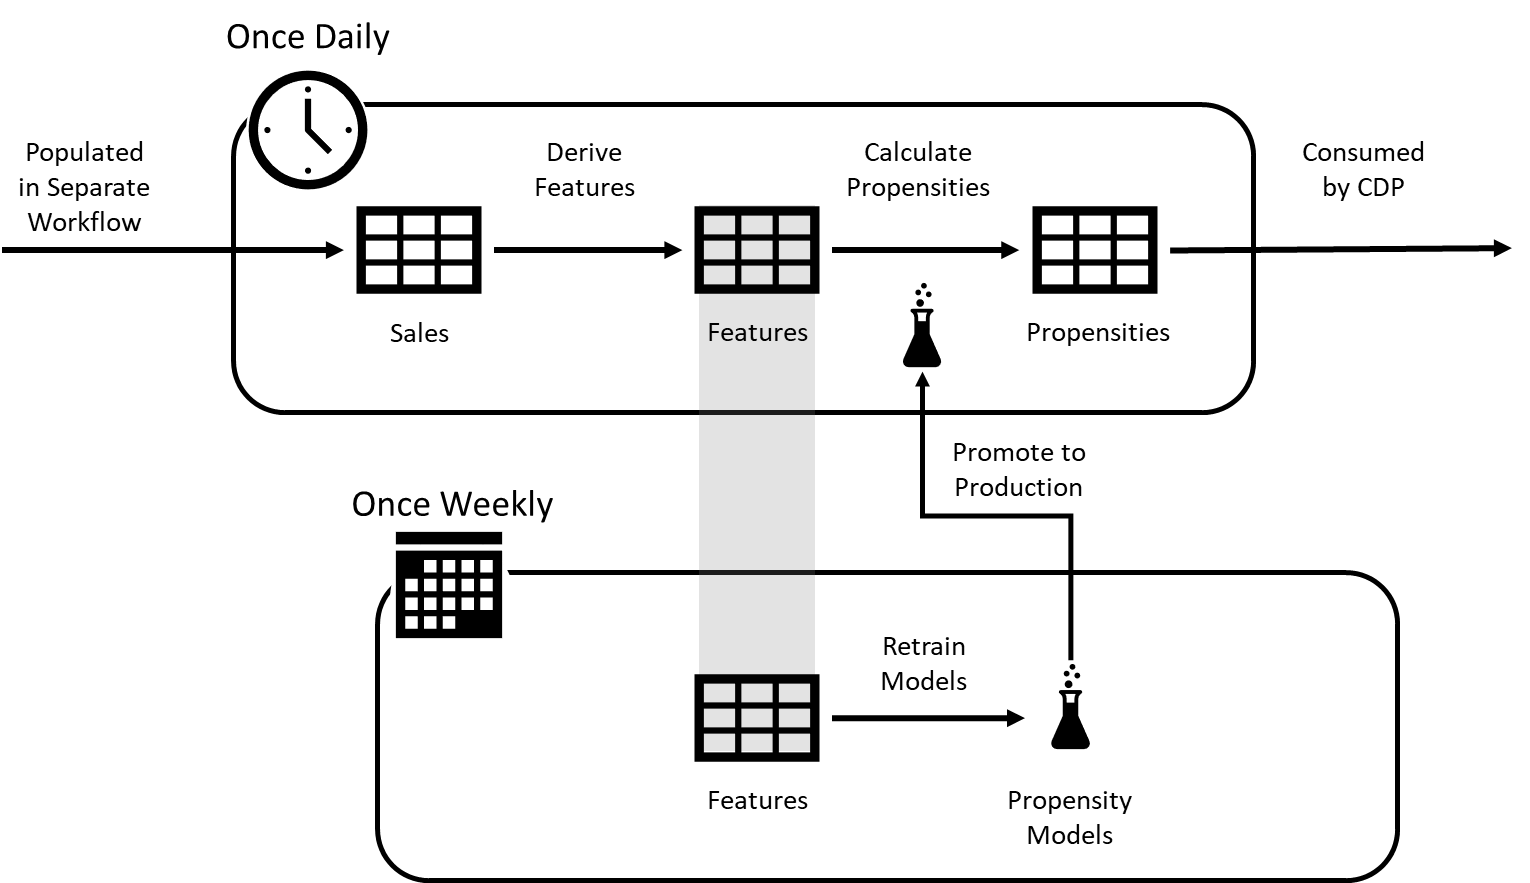 The organization of three key propensity scoring tasks into two loosely coupled workflows